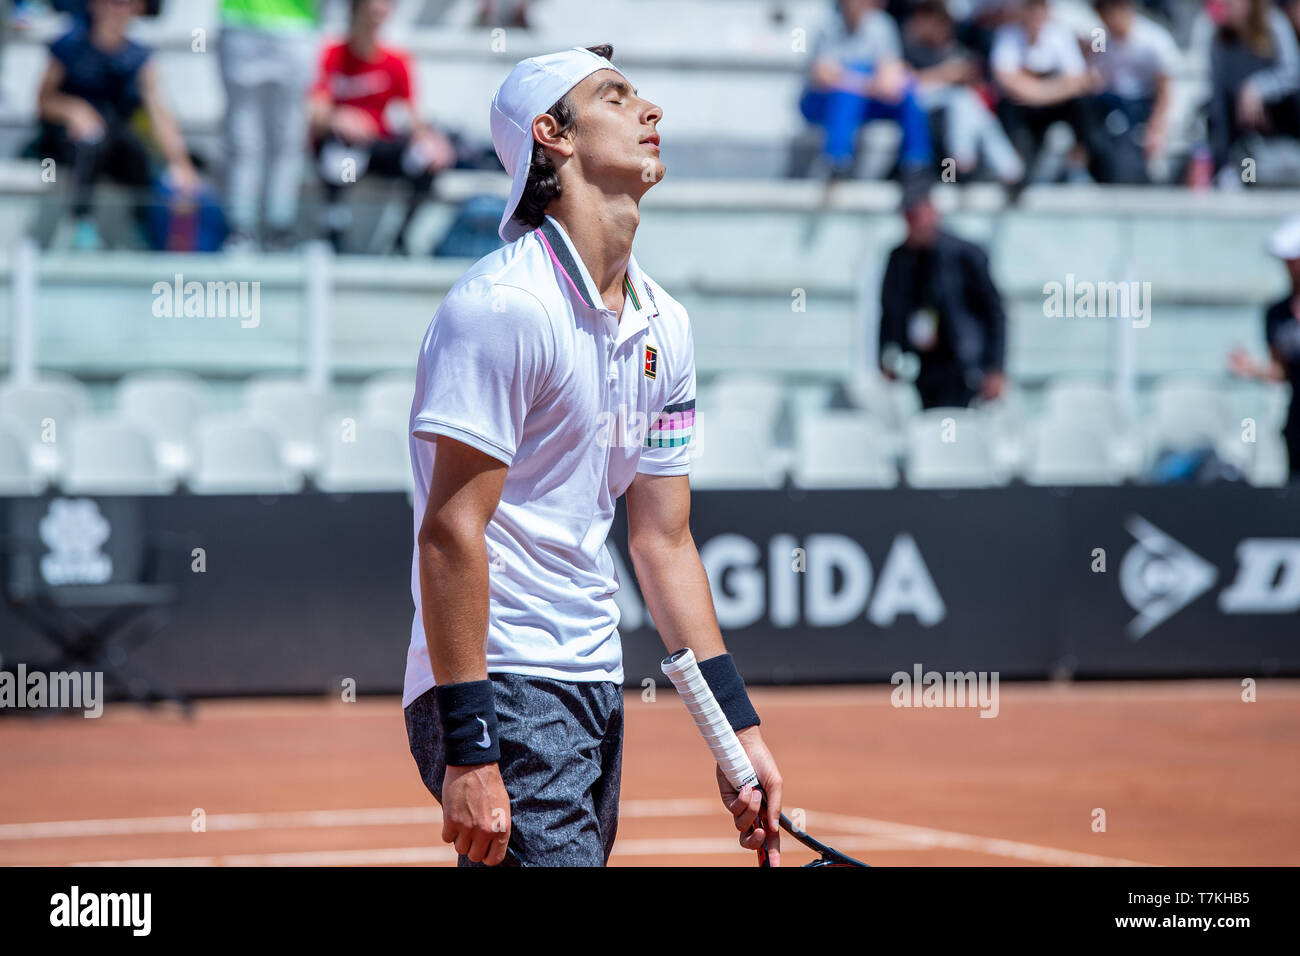 Rome, Italy. 08th May, 2019. Lorenzo Musetti of Italy looks dejected during  his pre-qualification match against Jannik Sinner of Italy during the ATP  Masters 1000 Rome - 2019 Italian Open at the